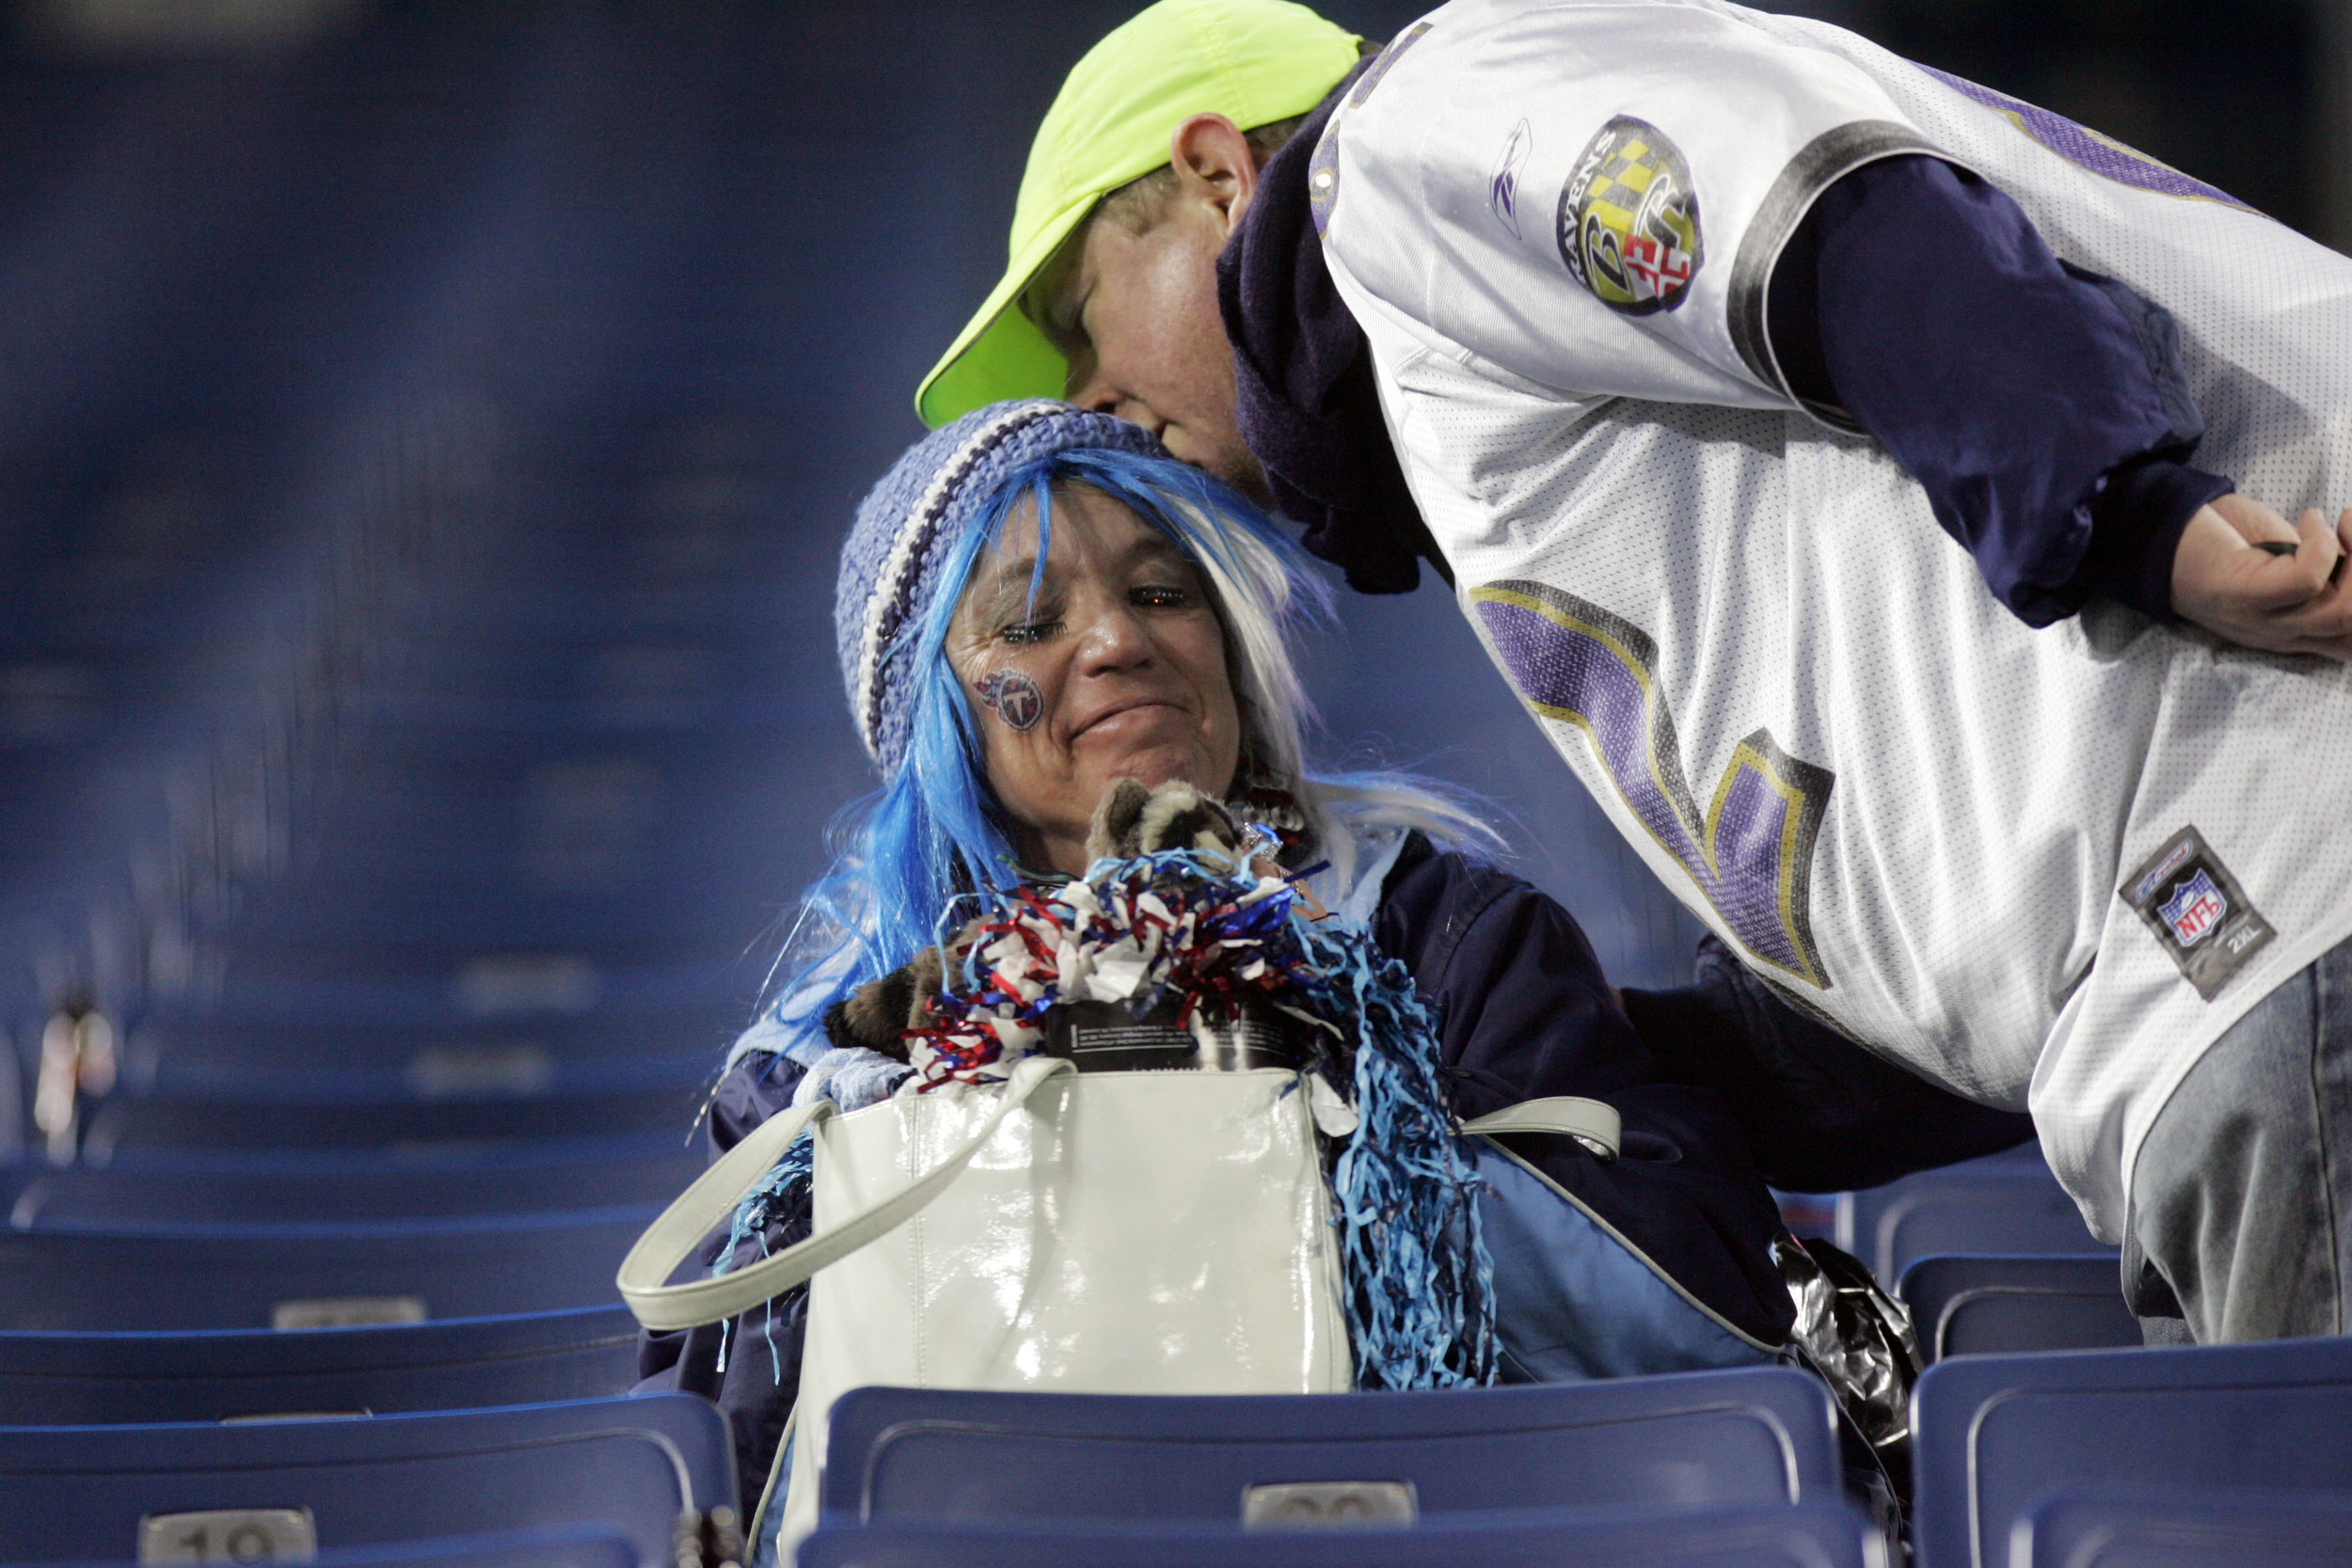  Titans fan Helen Locke gets a consolation kiss from a Ravens fan as she sat depressed in the stands after the Ravens defeated the Titans in the playoffs, smashing hopes of a Titans Superbowl at LP Field Saturday, January 10, 2009 in Nashville, Tenn.